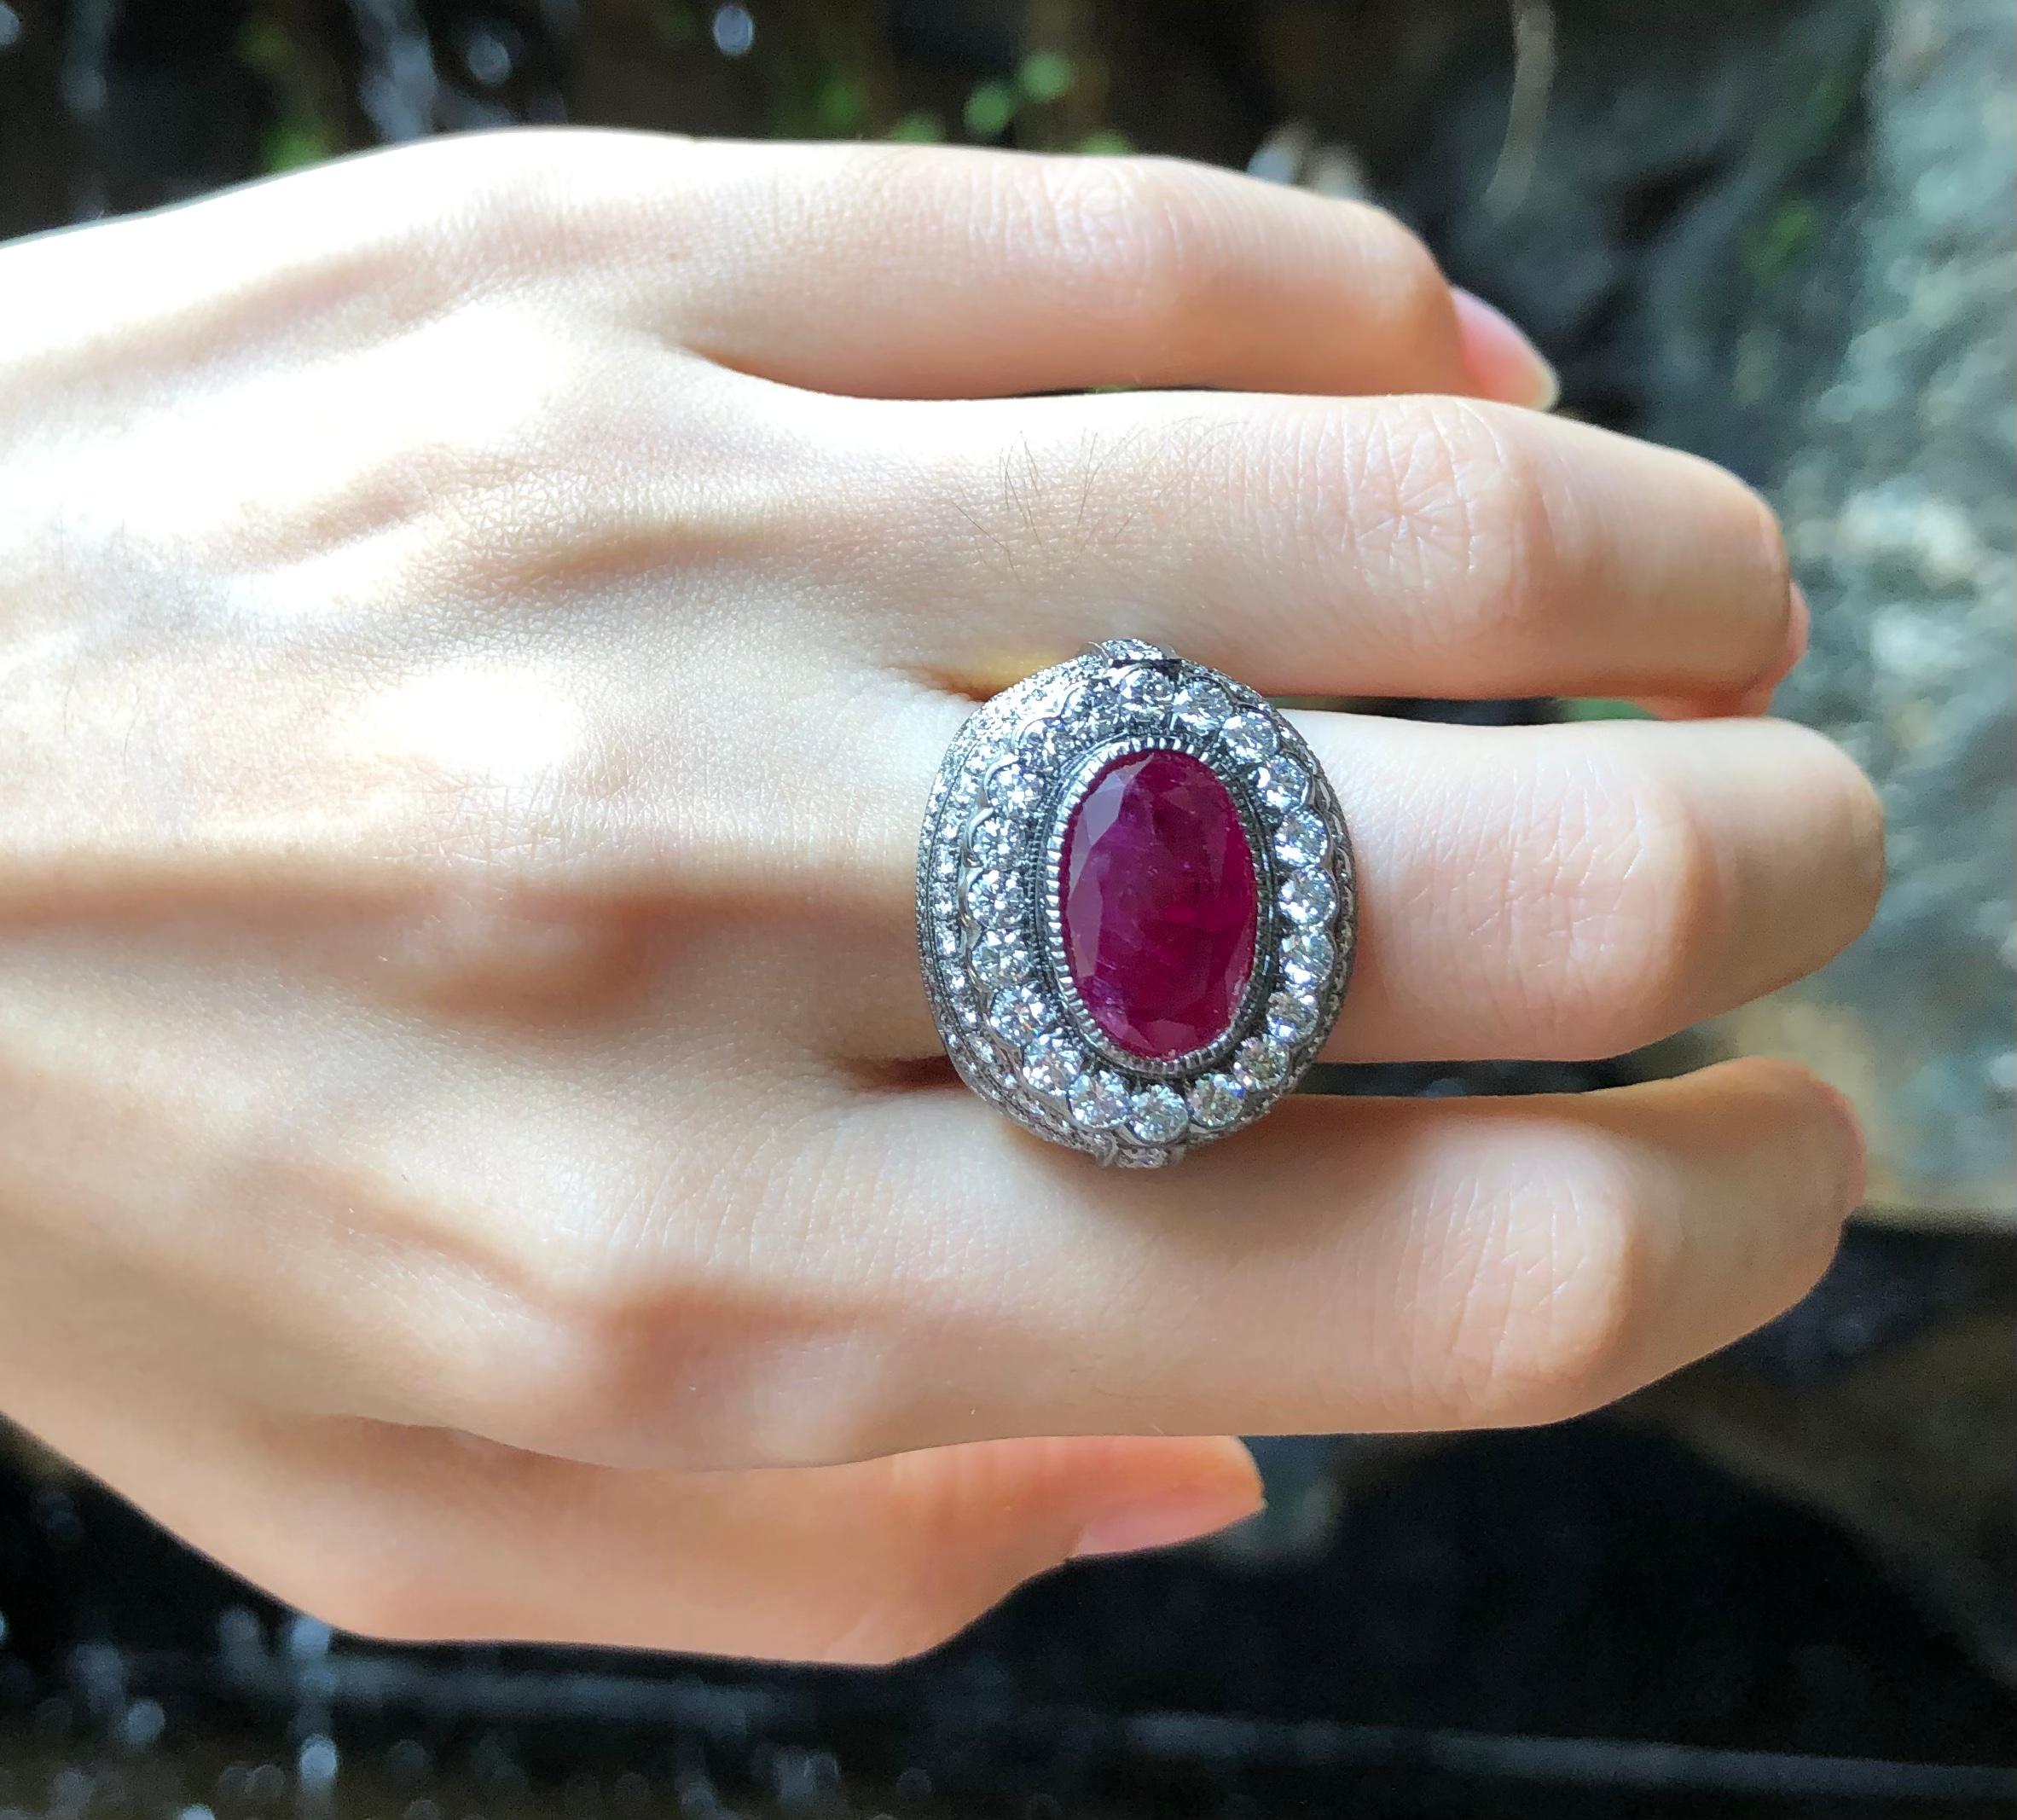 Ruby 5.57 carats with Diamond 2.96 carats Ring set in 18 Karat Gold Settings

Width:  2.3 cm 
Length:  2.1 cm
Ring Size: 59
Total Weight: 16.13 grams

Ruby
Width:  1.5 cm 
Length:  1.0 cm

